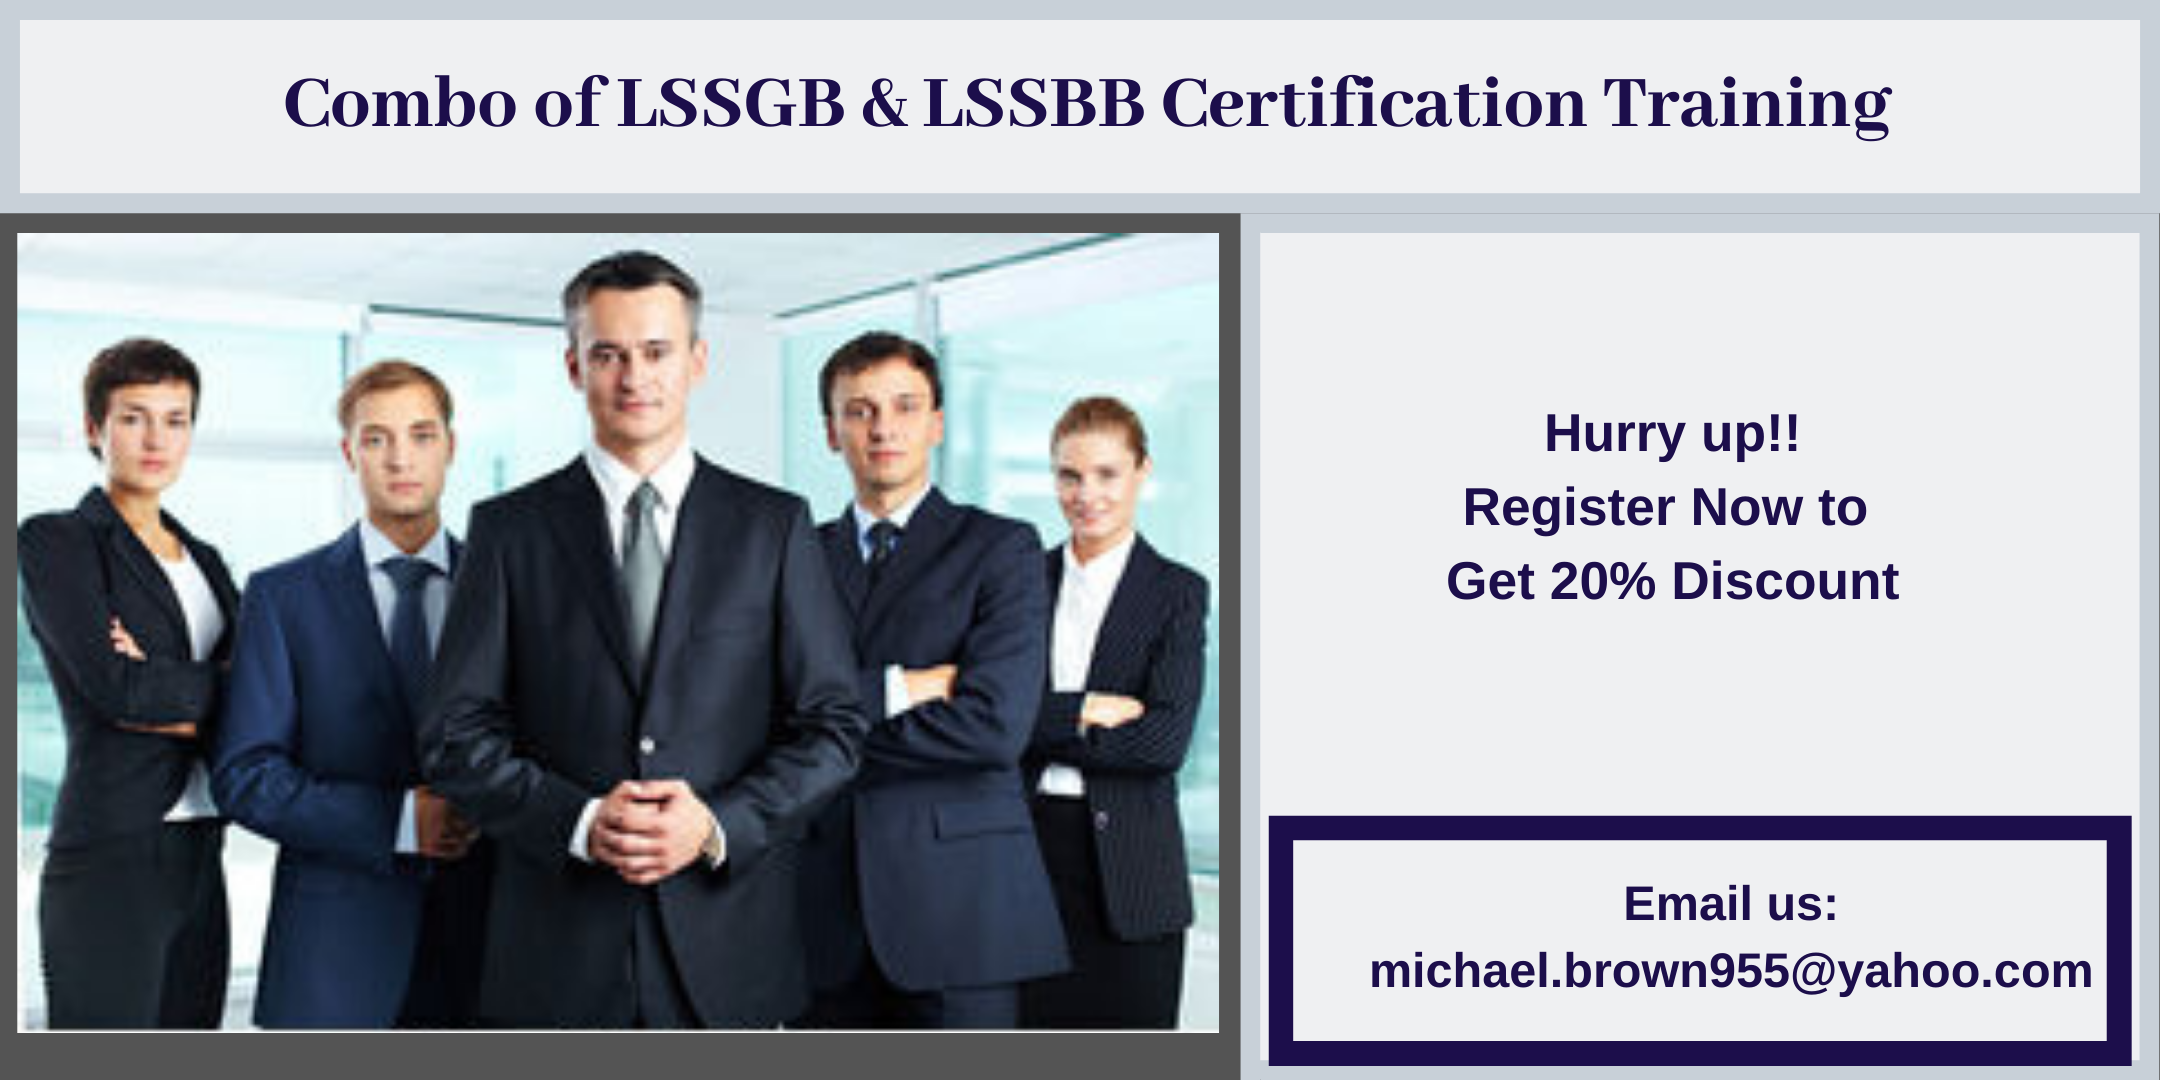 Combo of LSSGB & LSSBB 4 days Certification Training in Atwood, CA